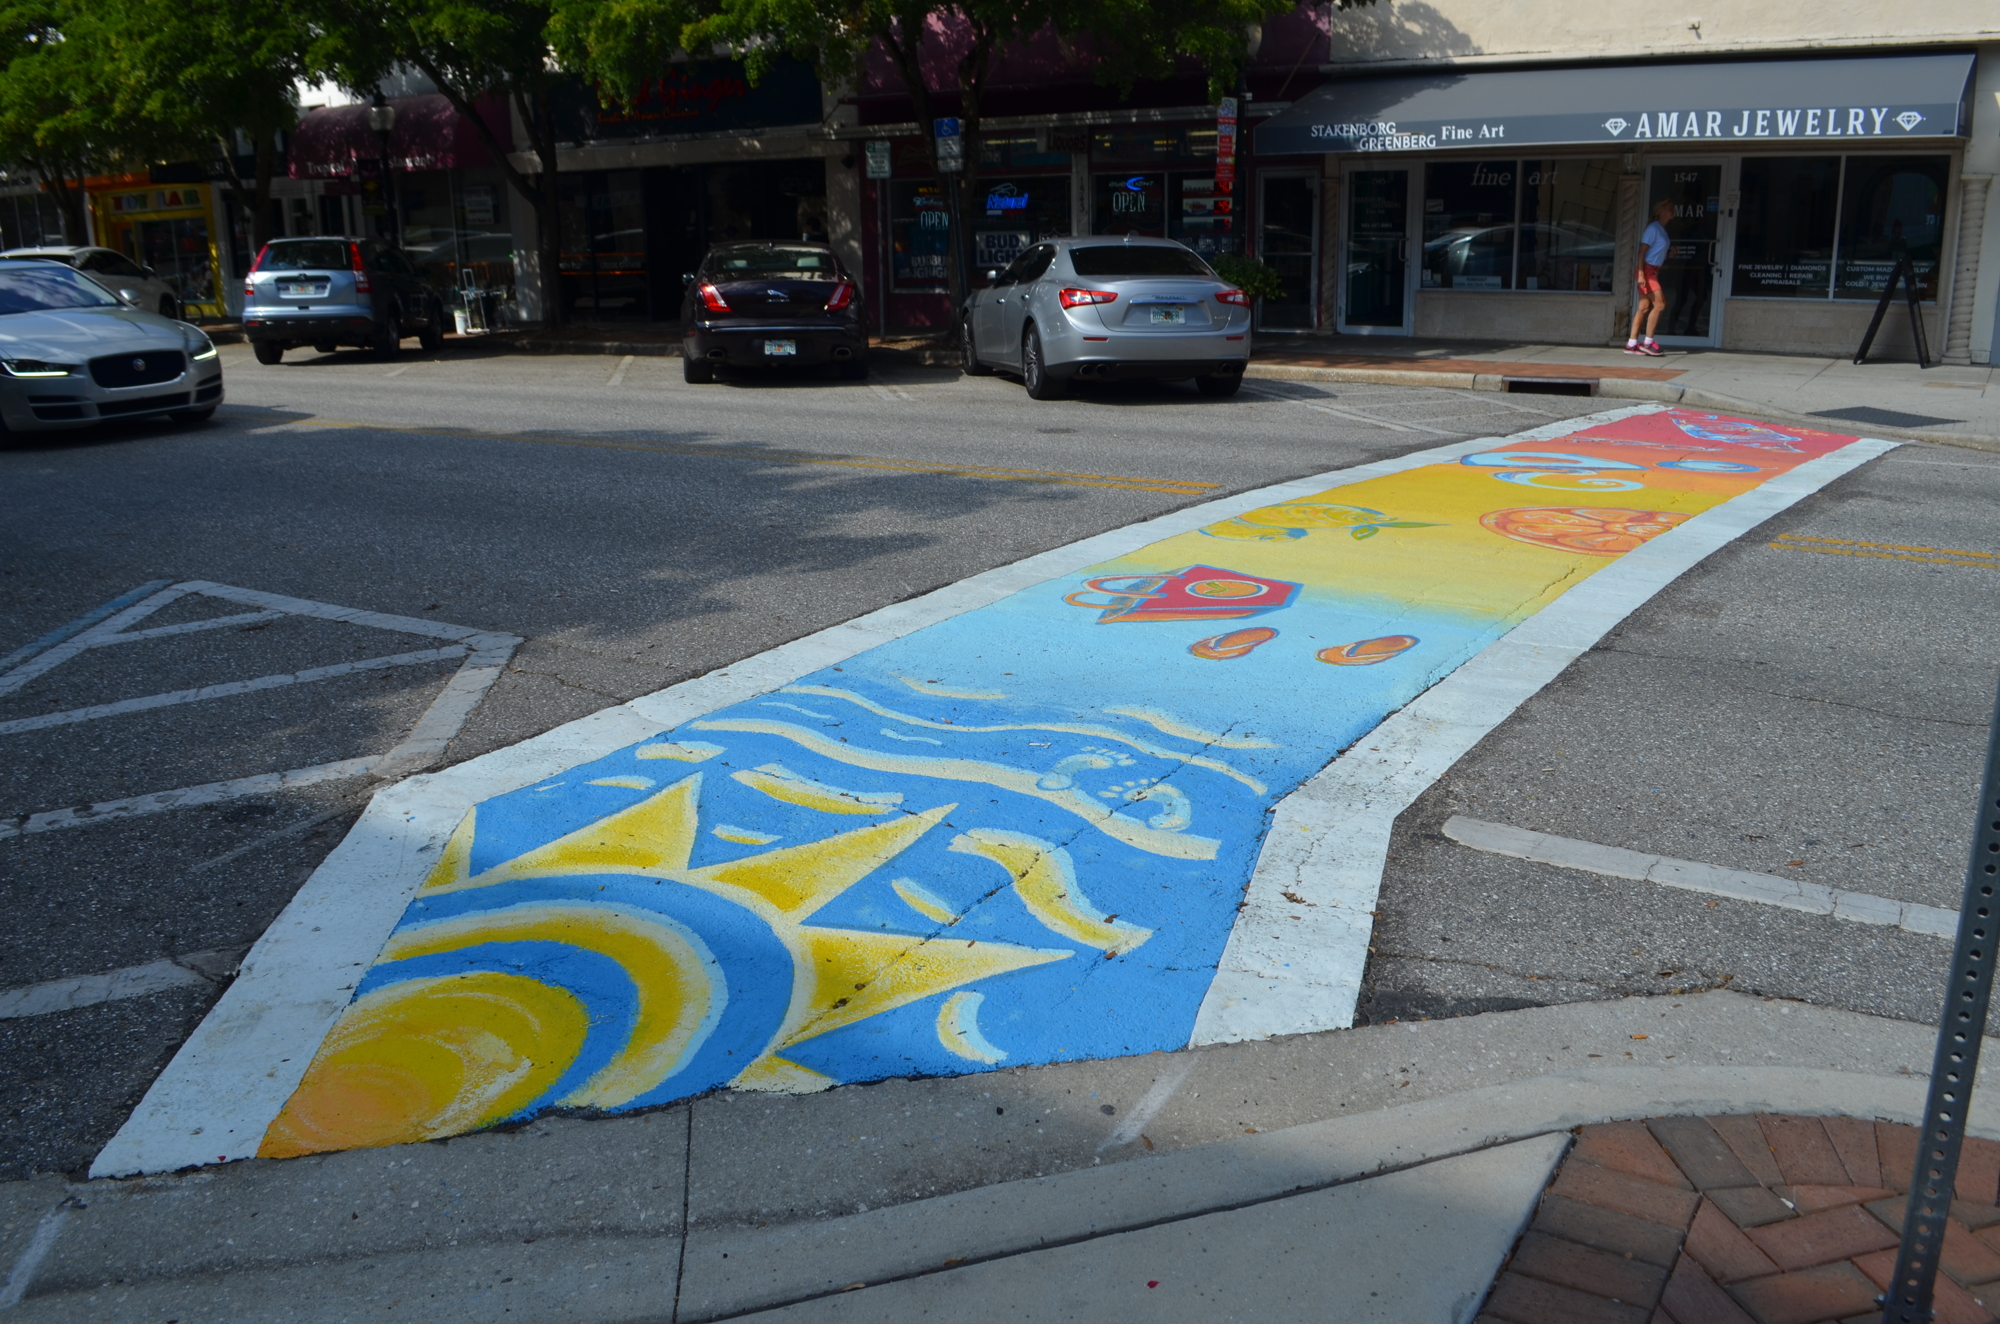 Beginning next year, the city could commission more crosswalk paintings, staff said.